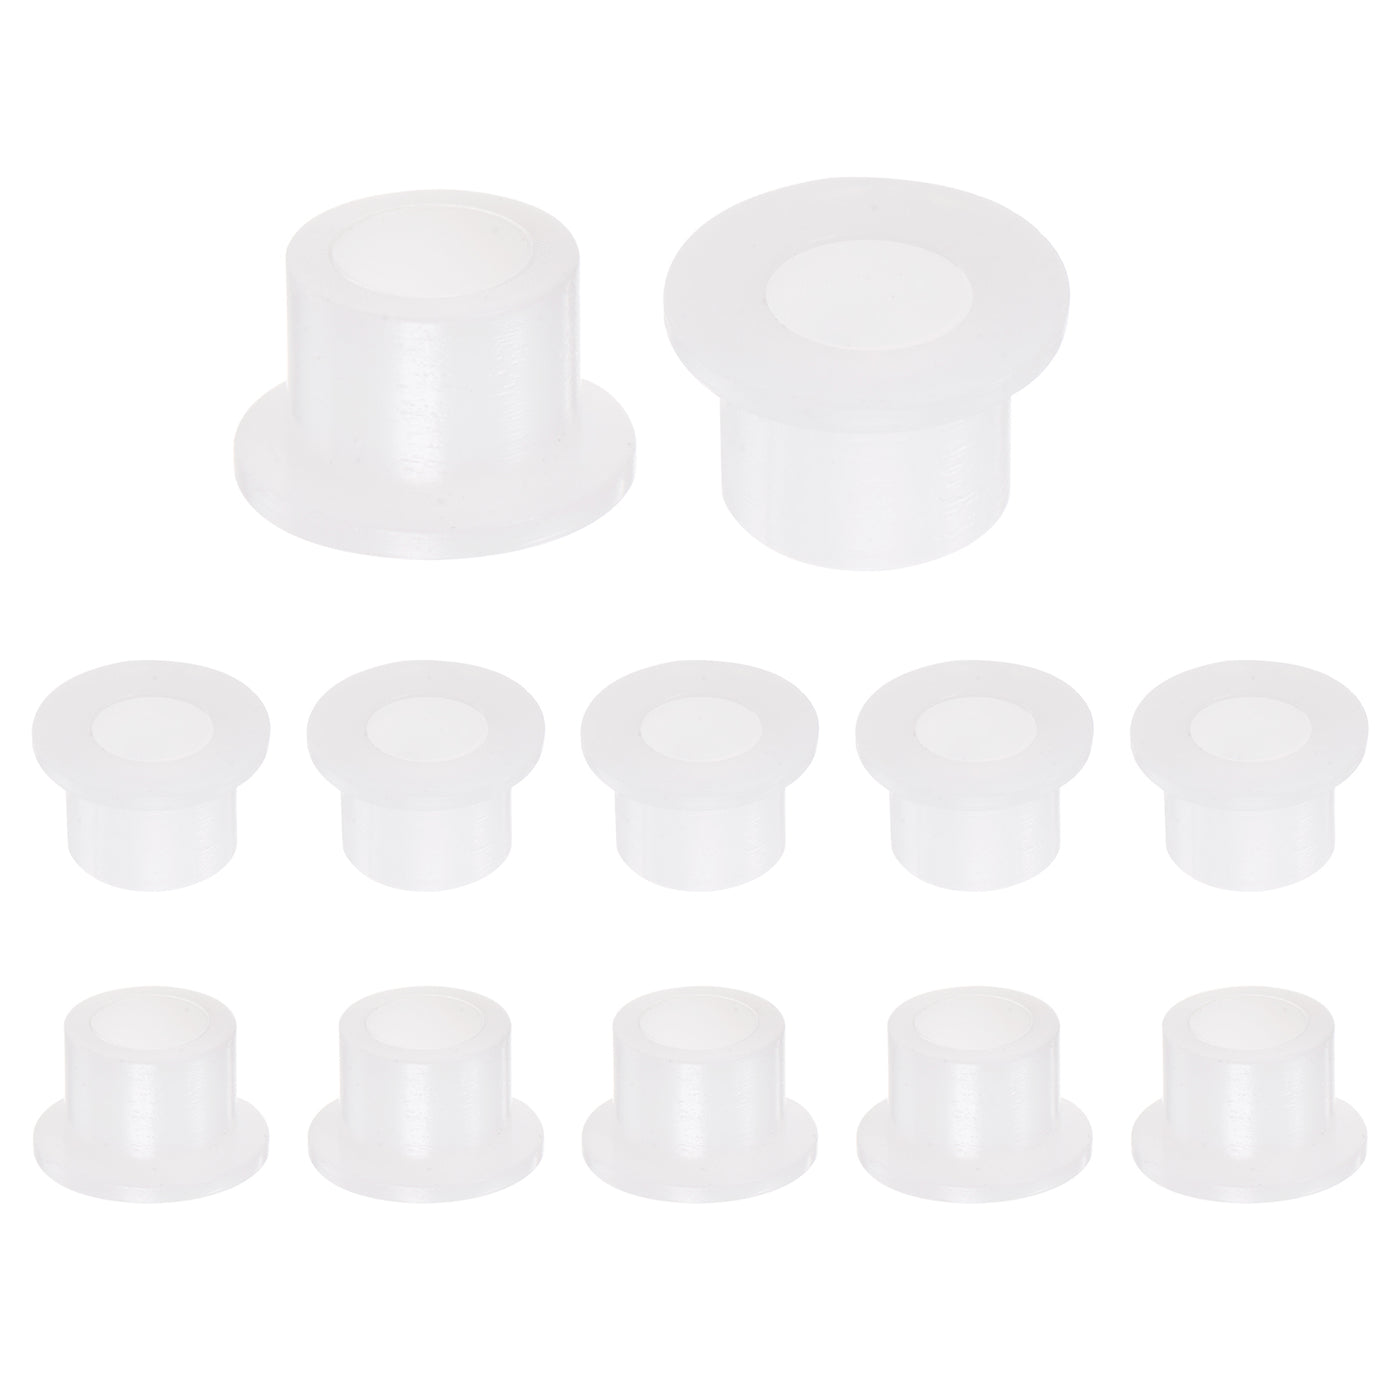 uxcell Uxcell 12pcs Flanged Sleeve Bearings 5.5mm ID 8.5mm OD 7mm Length Nylon Bushings, White